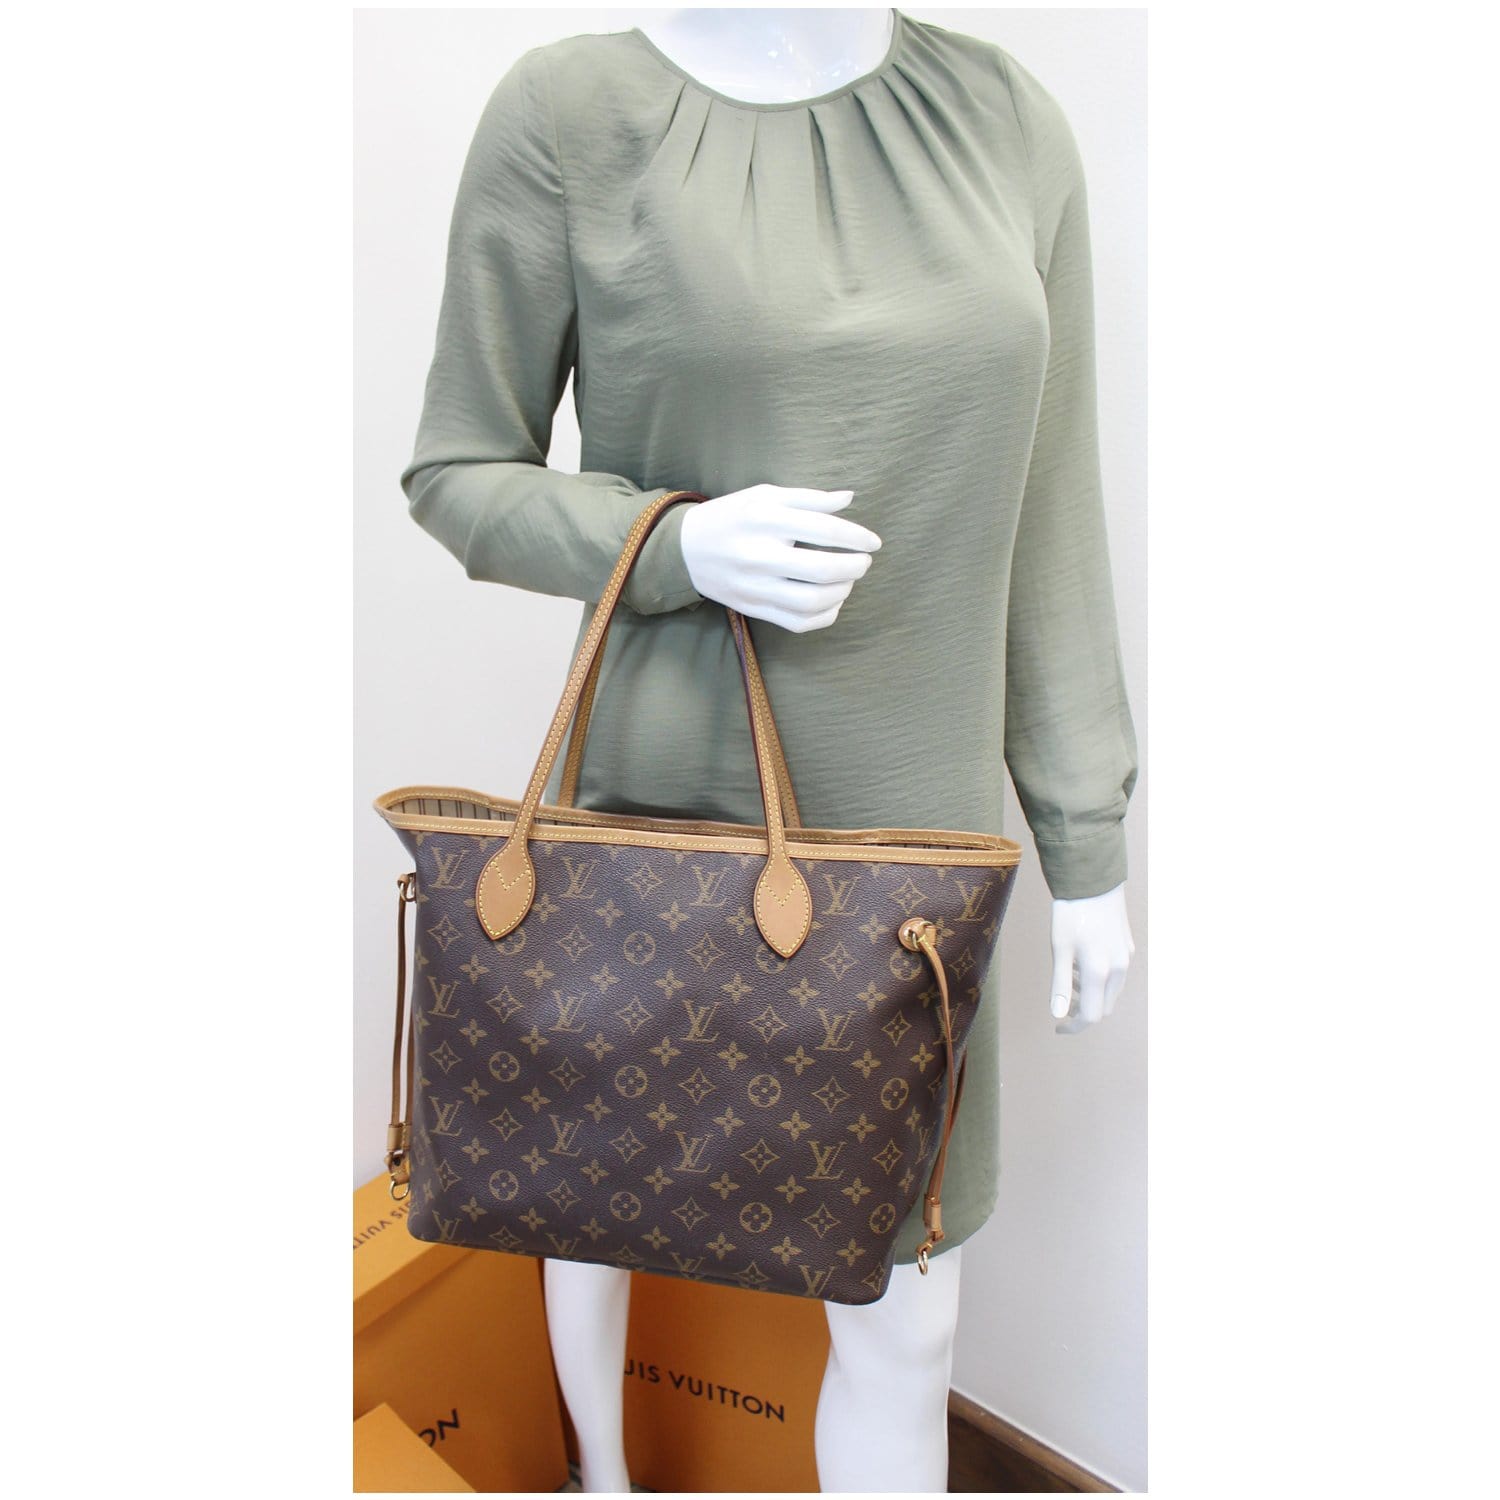 Louis Vuitton 2012 pre-owned Neverfull PM tote bag